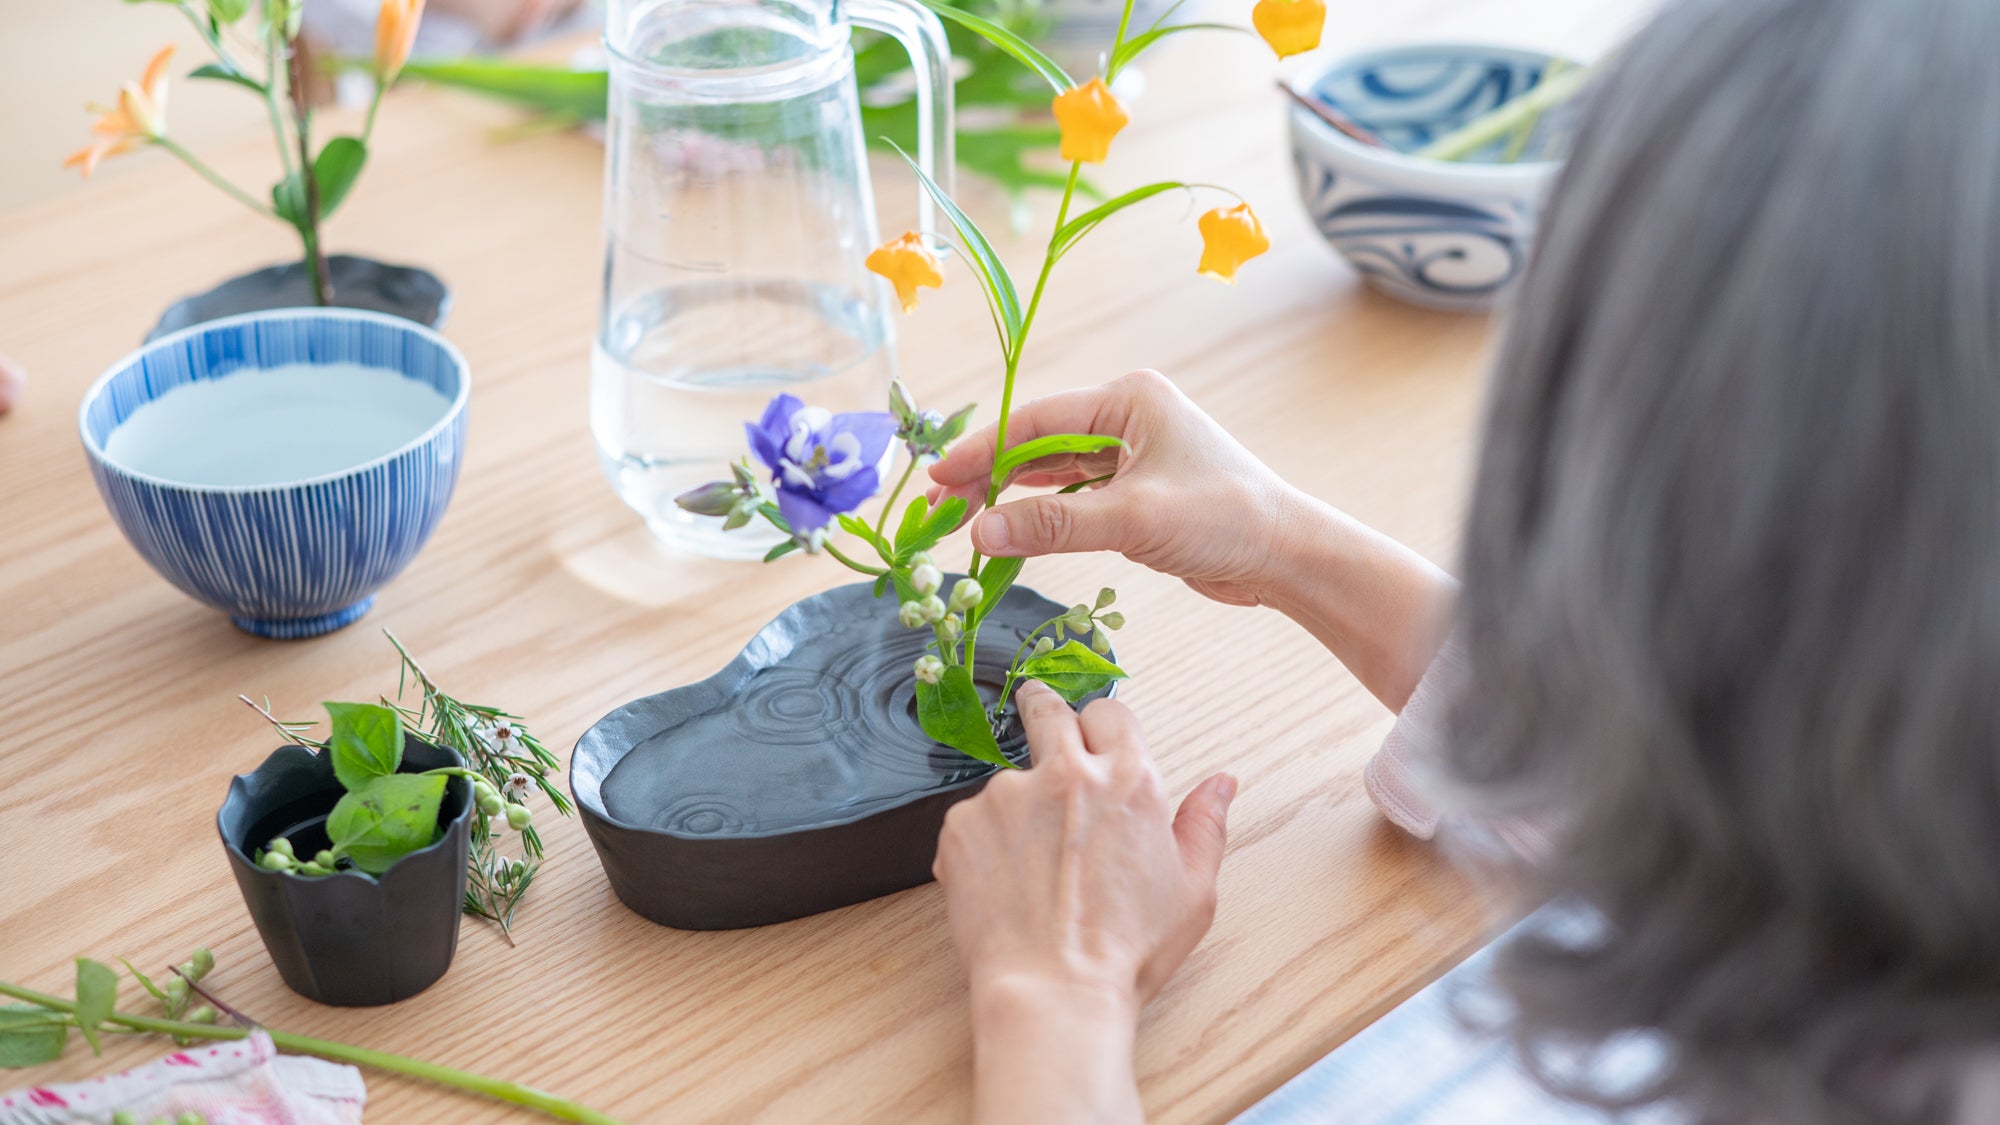 A Step-by-Step Guide for Ikebana Beginners - Part 2